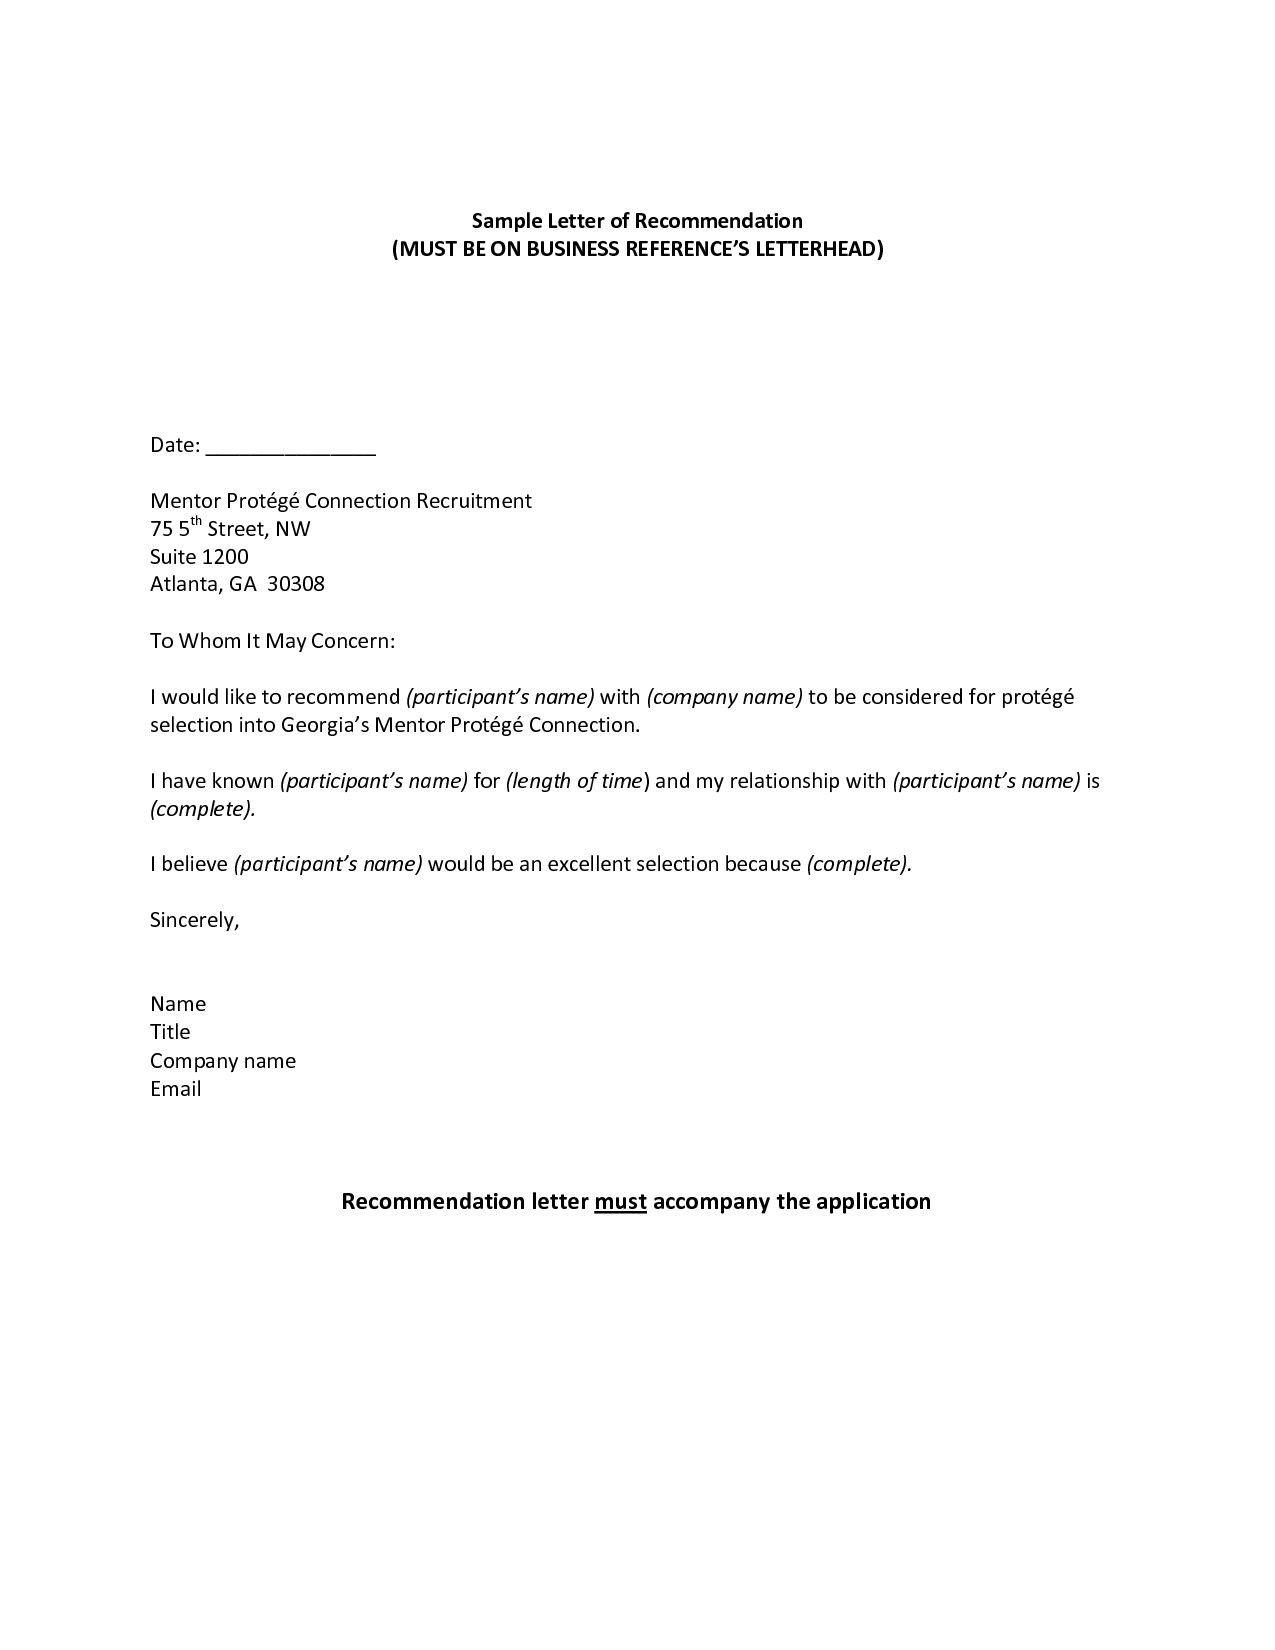 Professional Reference Sample Recommendation Letter Jos within dimensions 1275 X 1650